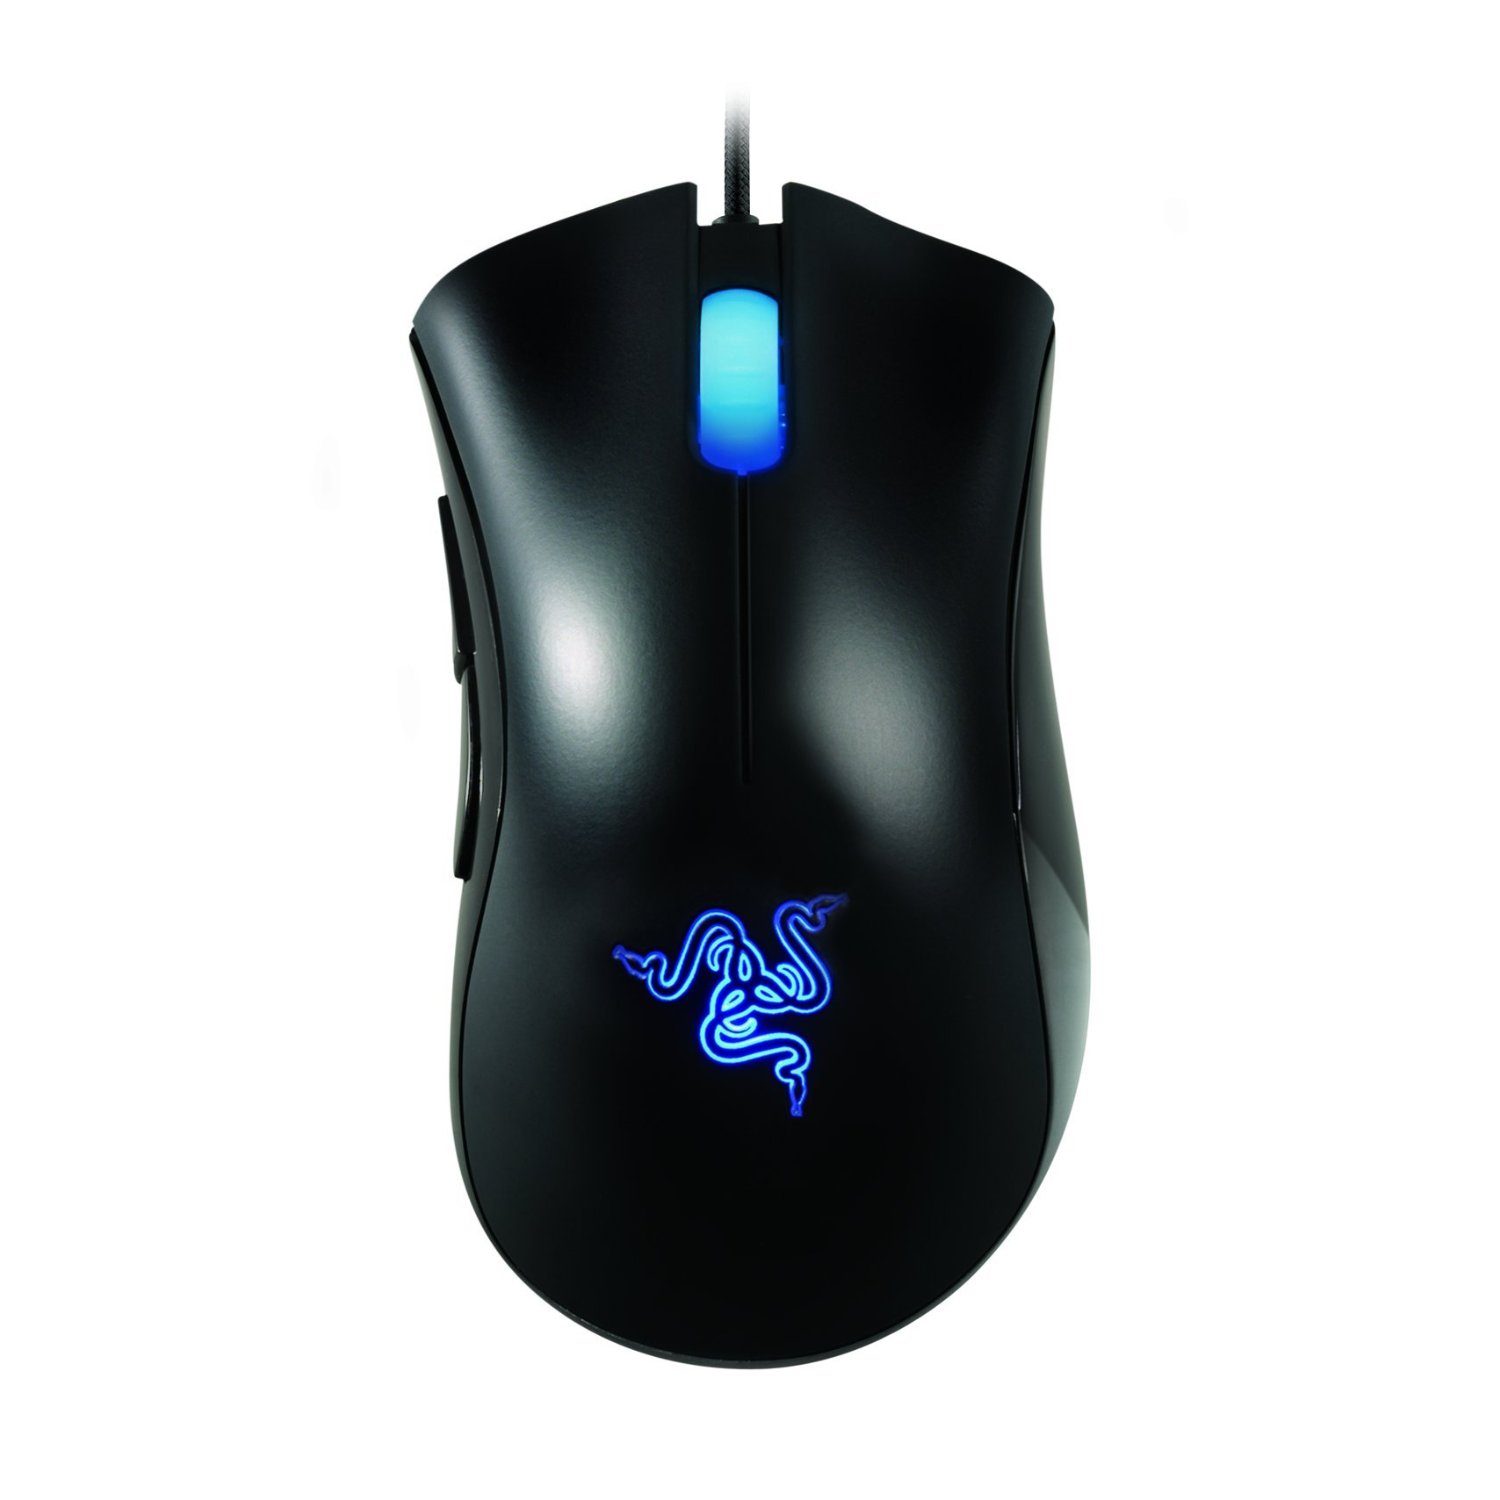 http://thetechjournal.com/wp-content/uploads/images/1111/1321032062-razer-deathadder-3500-high-precision-35g-infrared-gaming-mouse-9.jpg